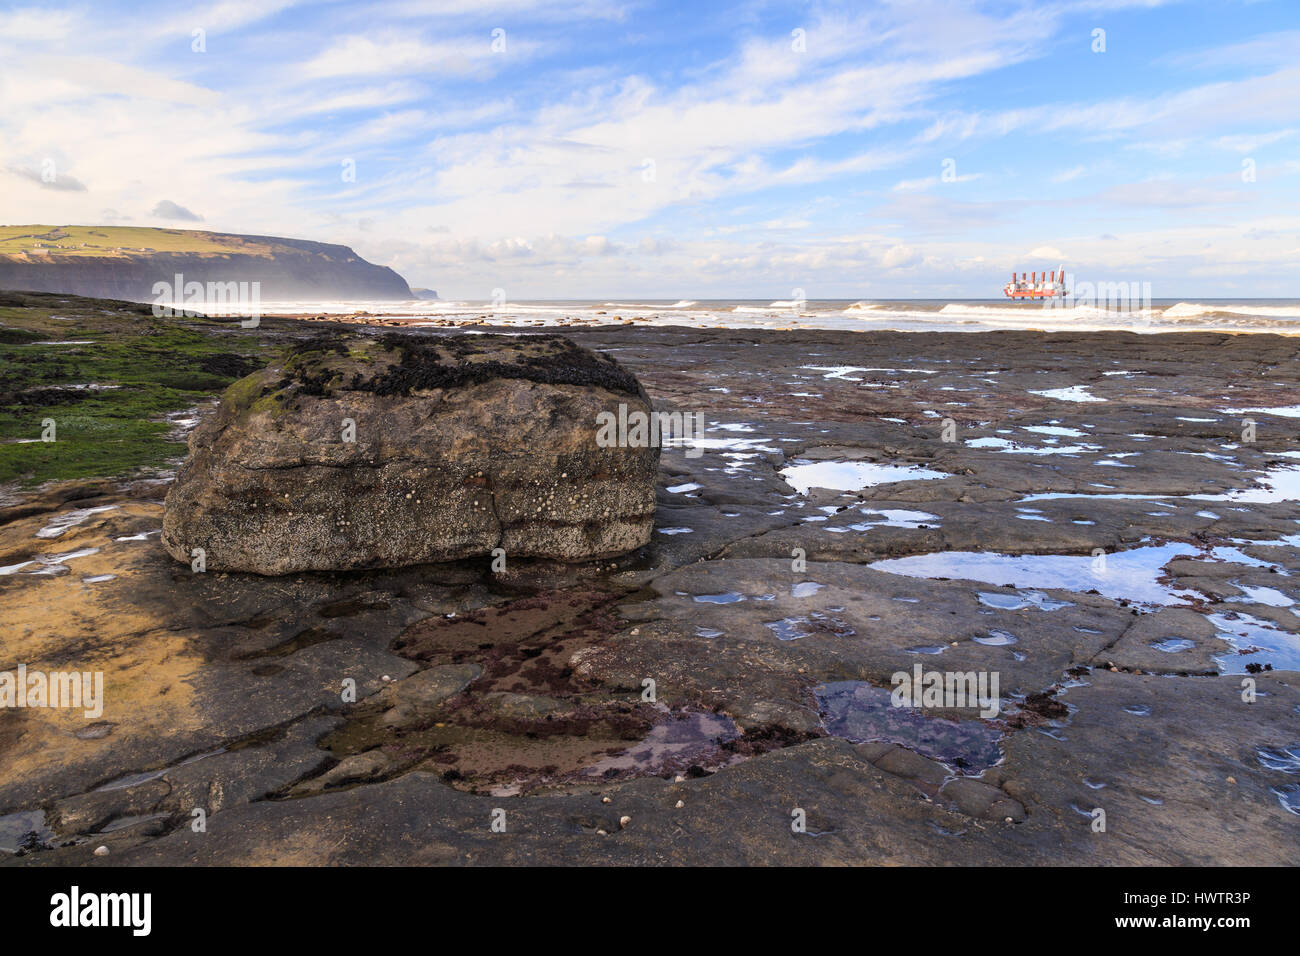 STAITHES, ENGLAND - MARCH 1: Rock and rock pools on Staithes beach. In Staithes, North Yorkshire, England. On 1st March 2017. Stock Photo